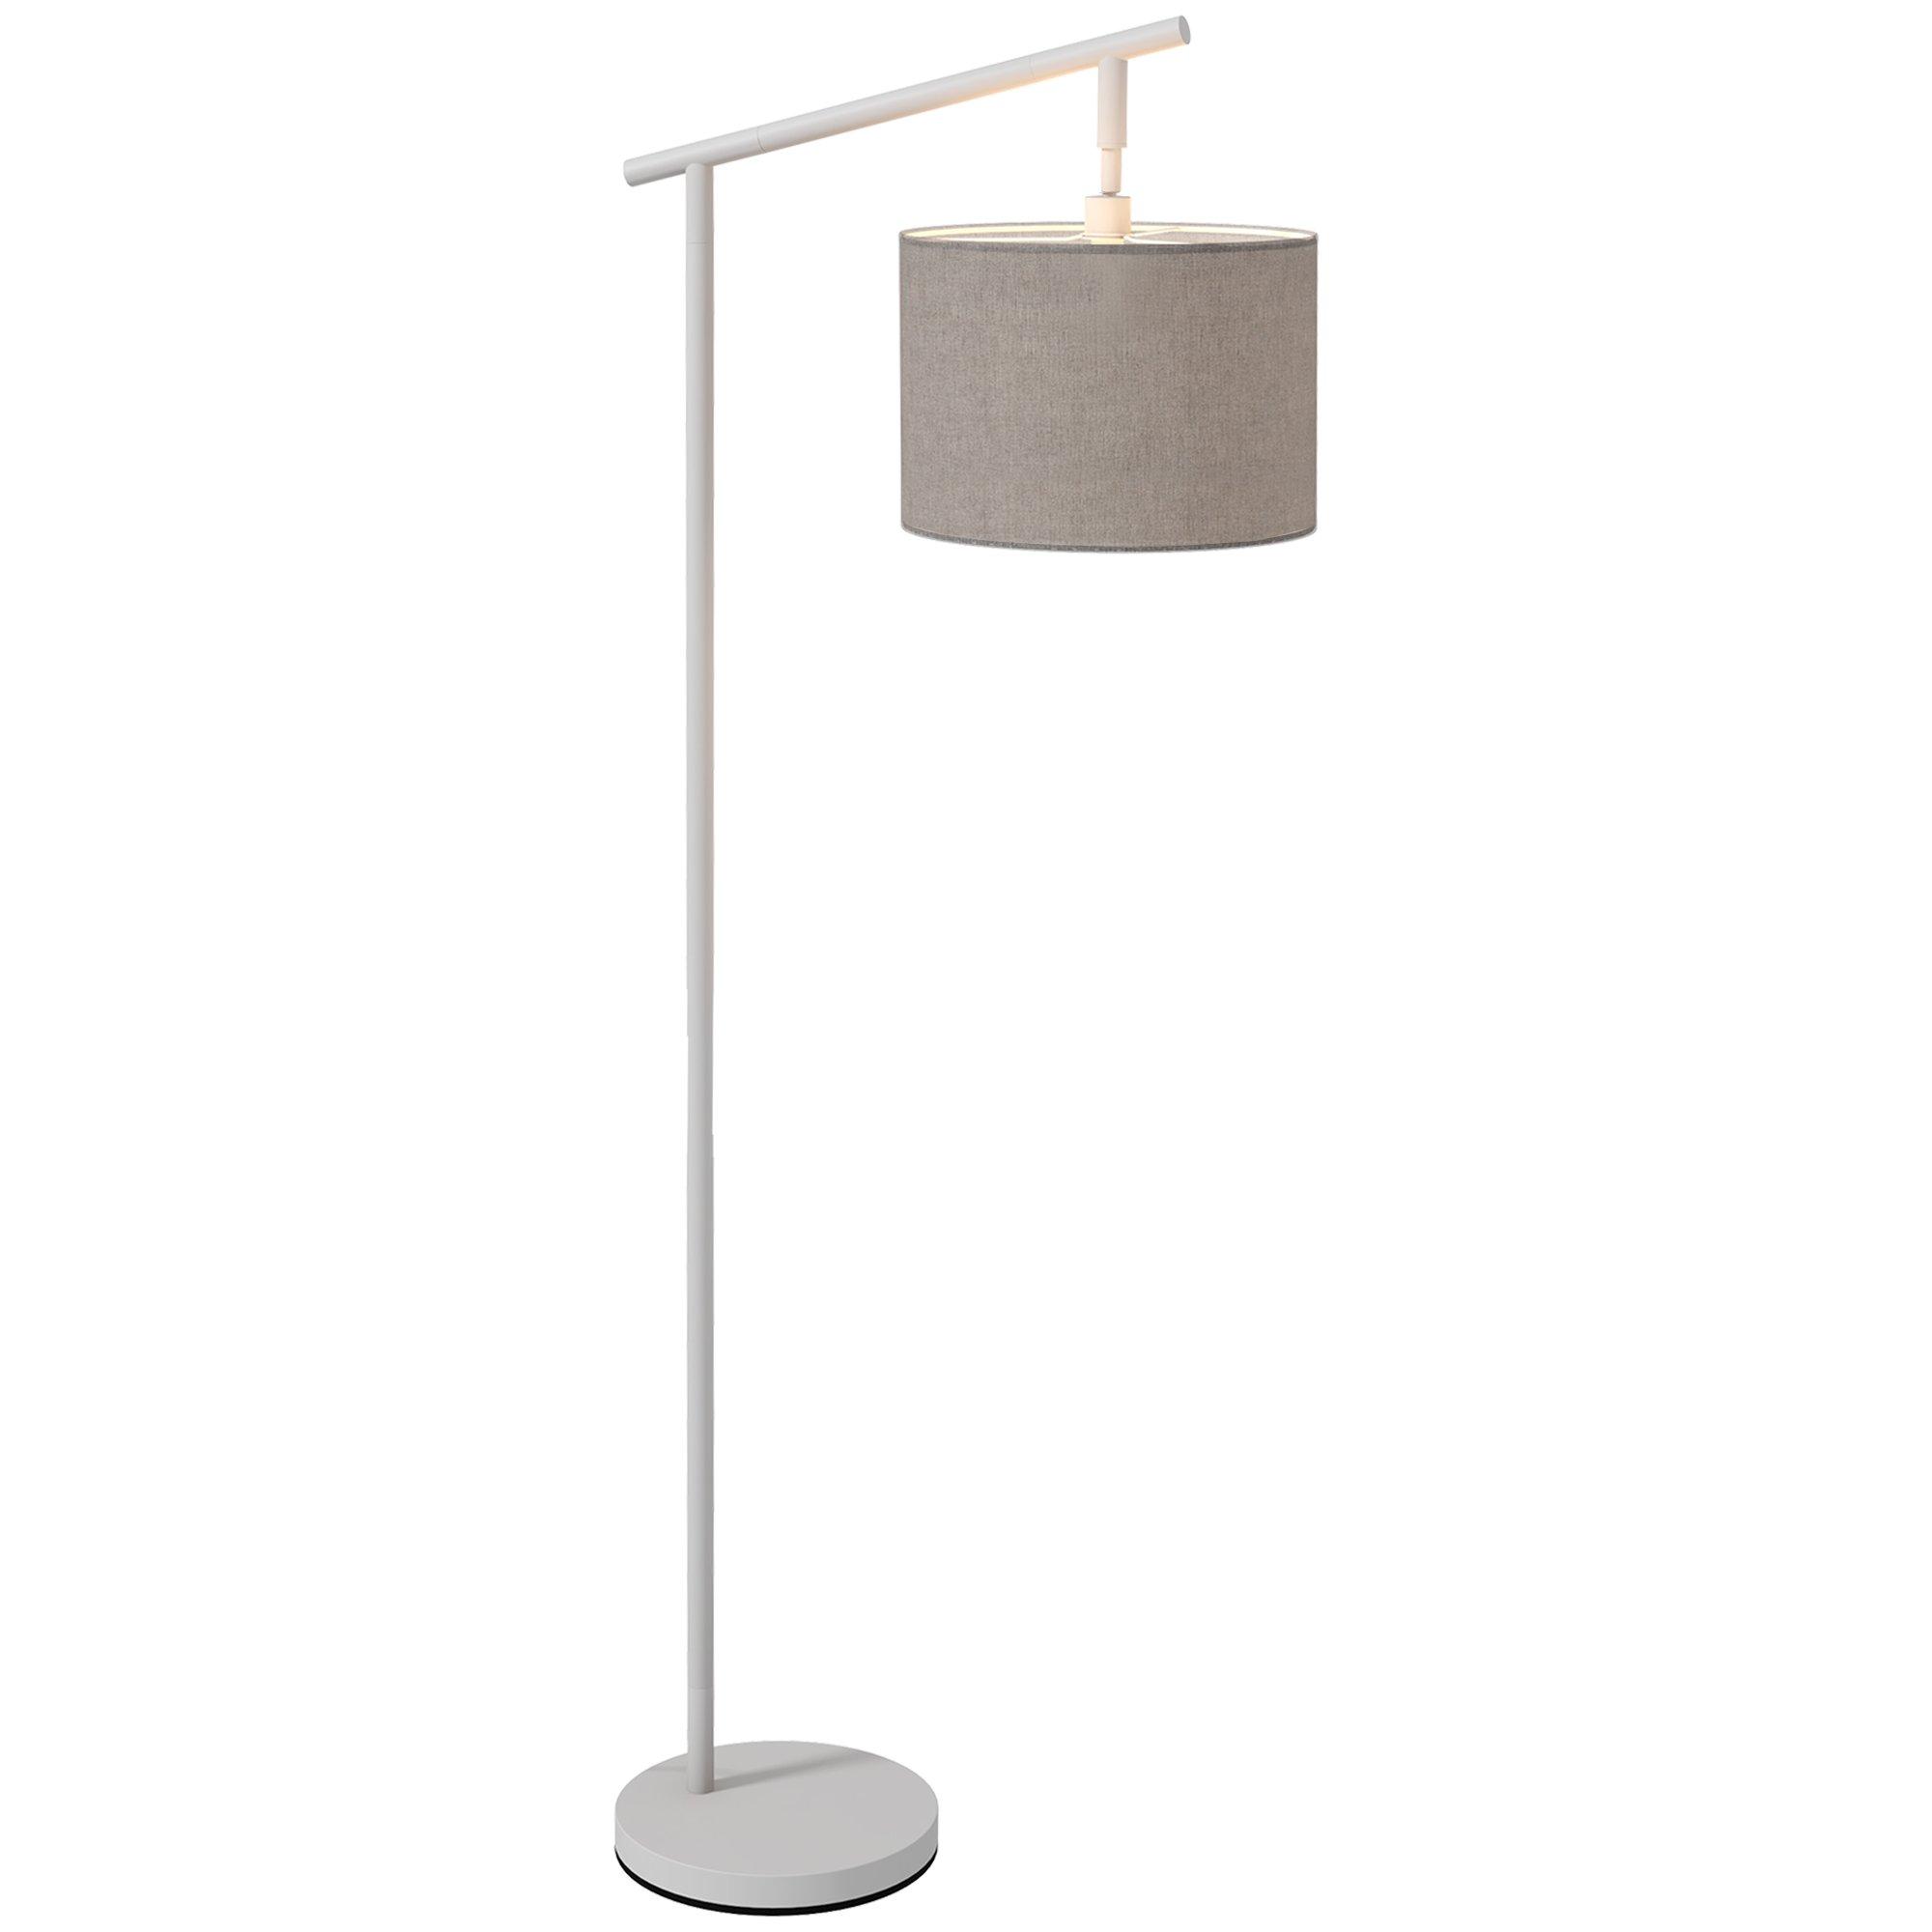 Modern Floor Lamp with 350 degree Rotating Lampshade LED Bulb Included